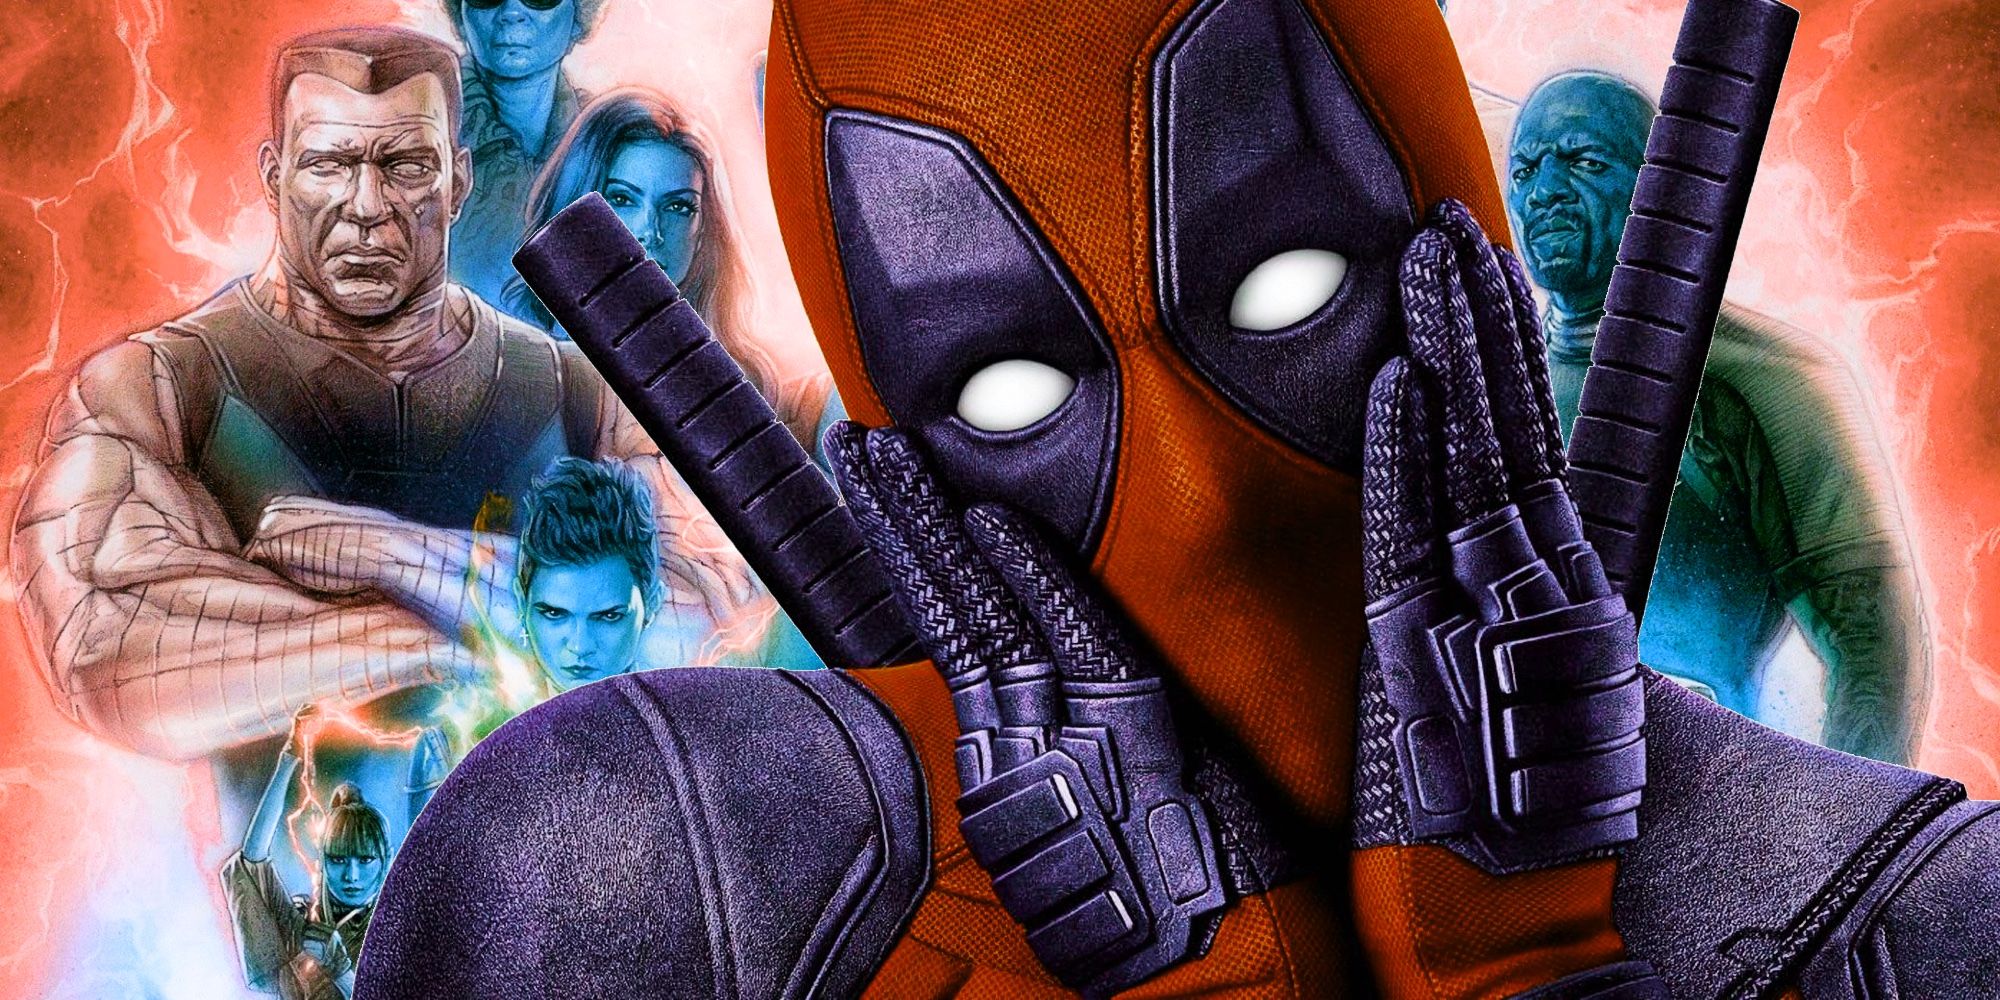 mcu deadpool 3 announcement at sdcc 2022 more likely